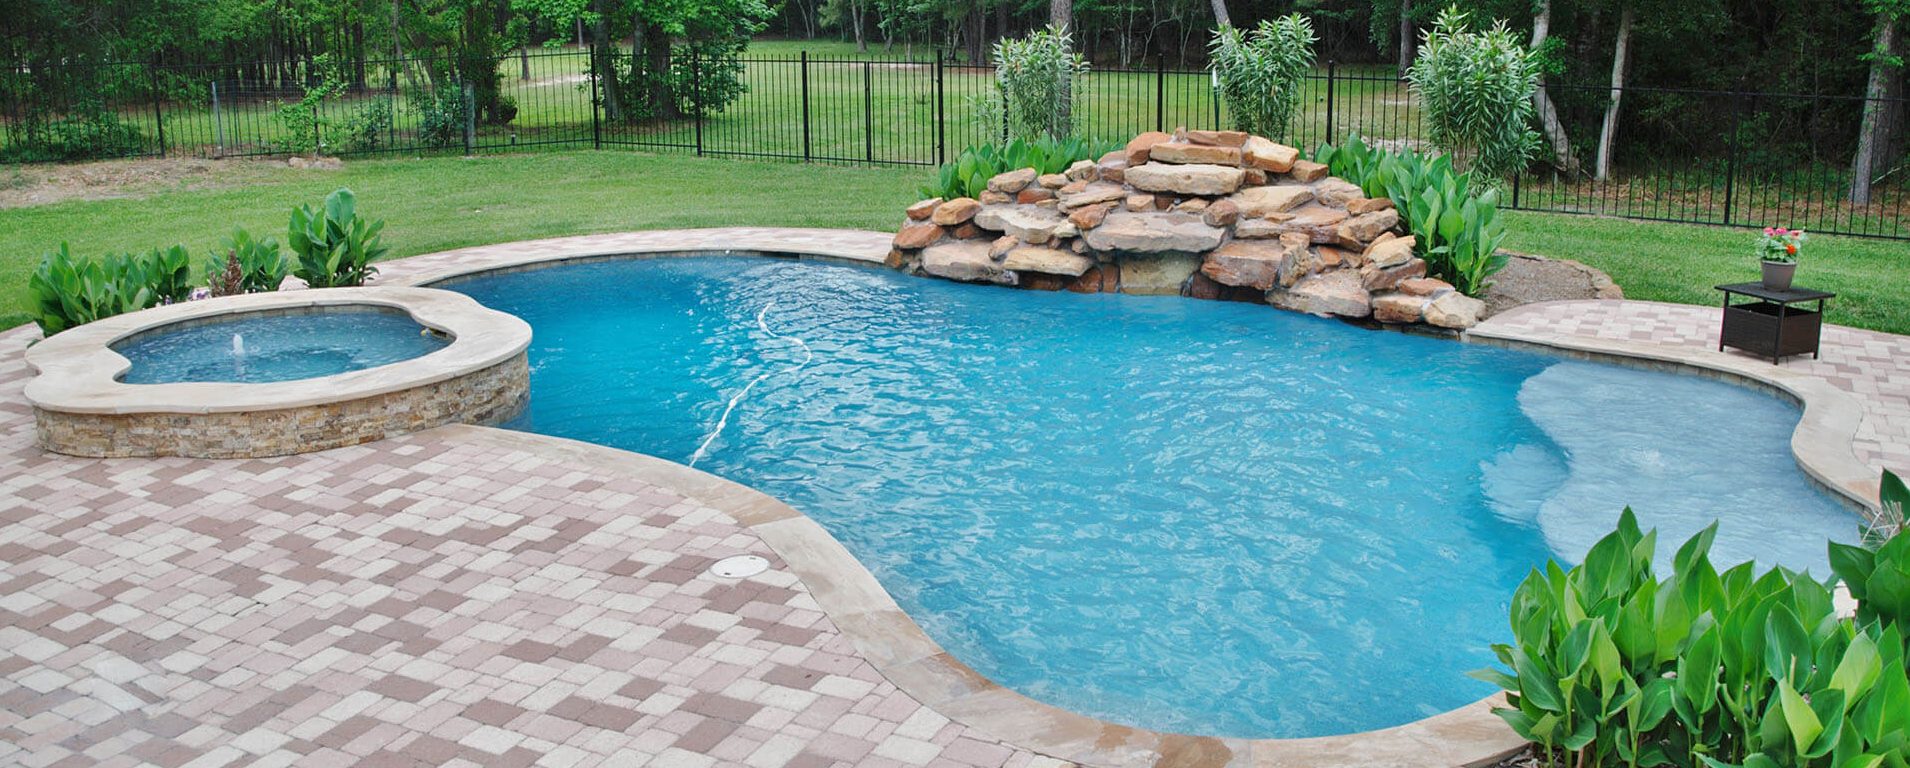 In-ground or Above-ground: What’s the right pool for you?